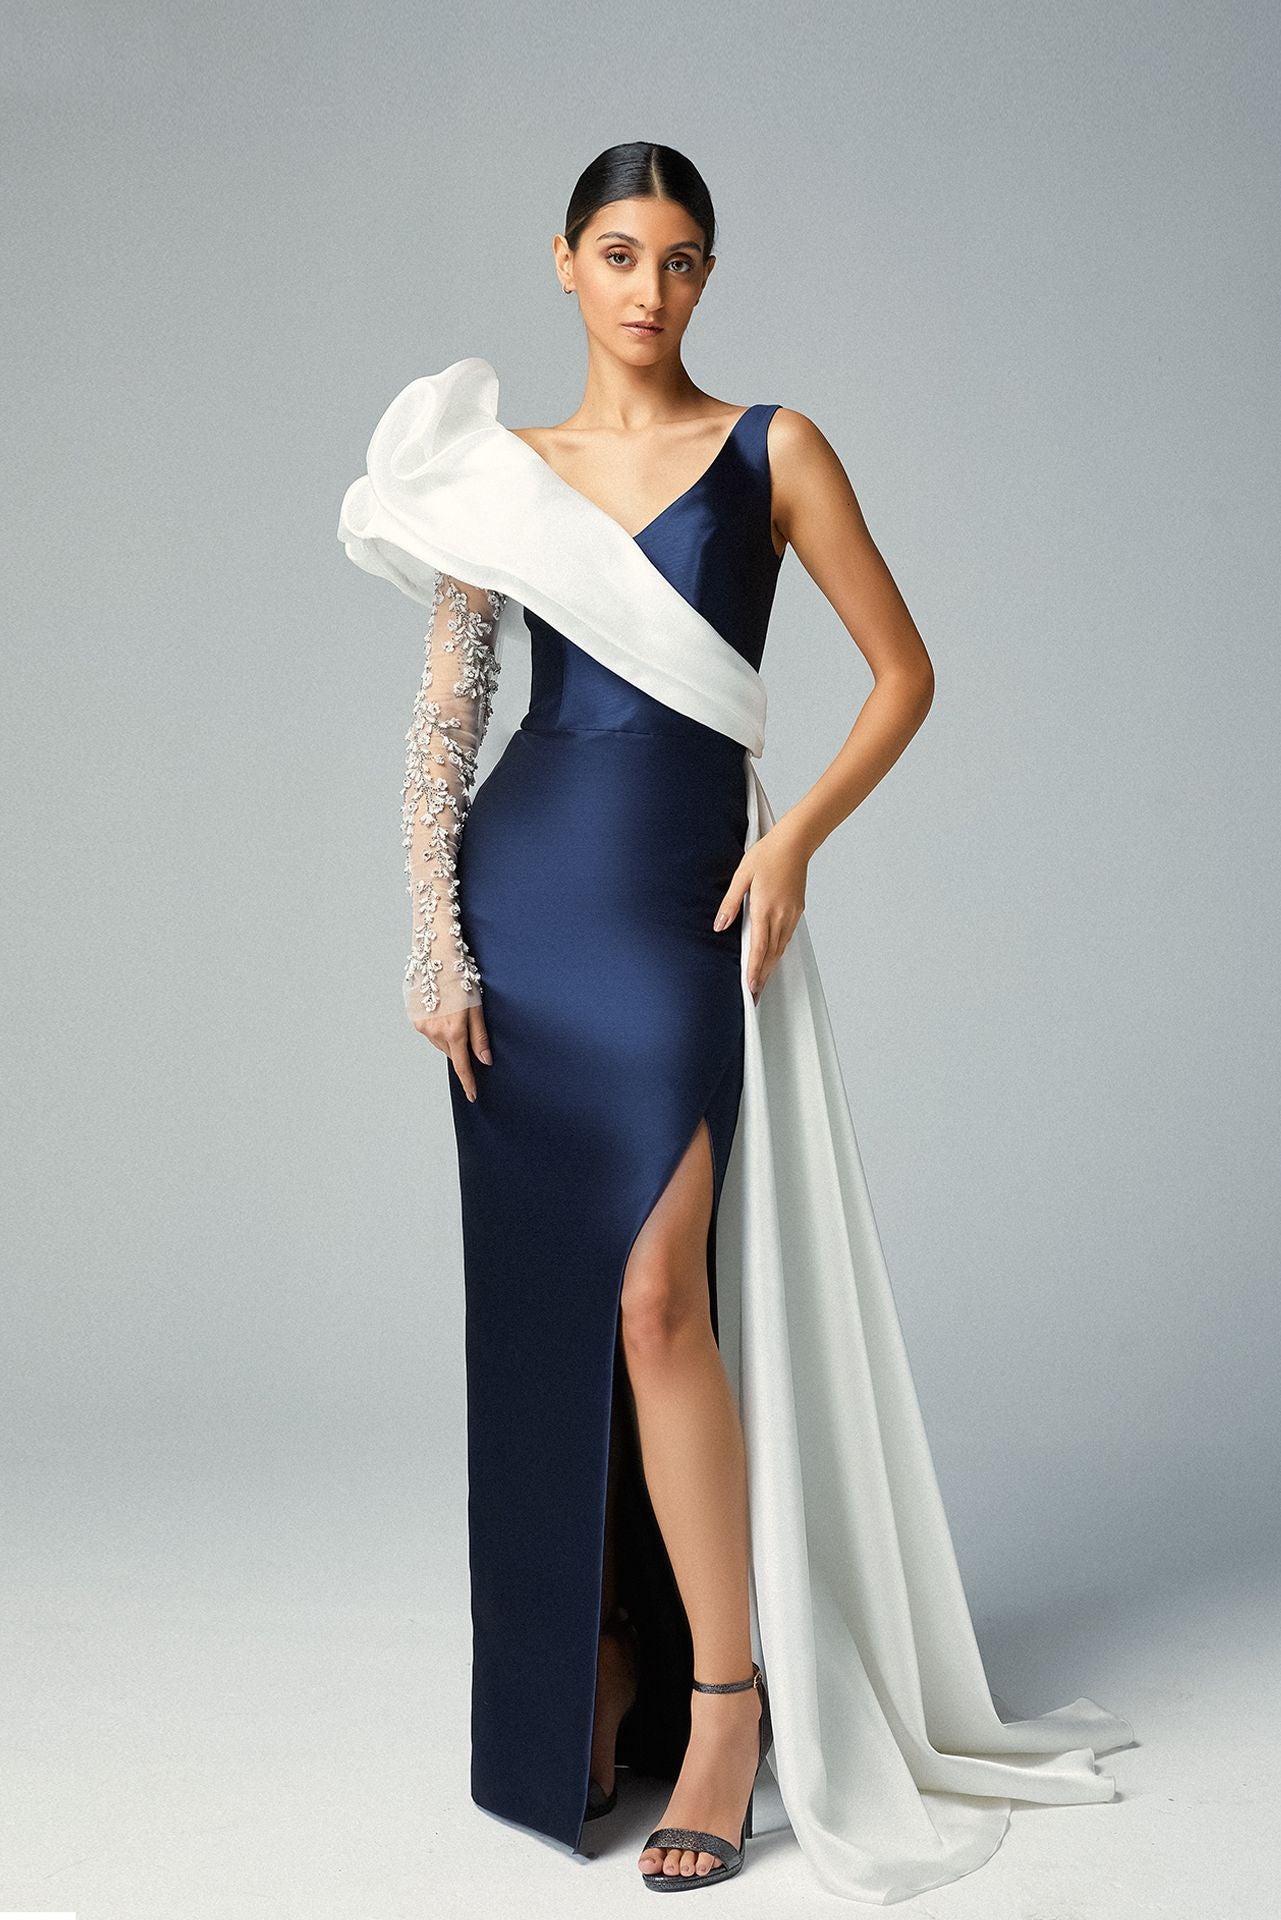 Swarovski embroidery Sheer Tulle Sleeve & Triple White Sashes of Tulle Cady Navy Blue Evening Dress